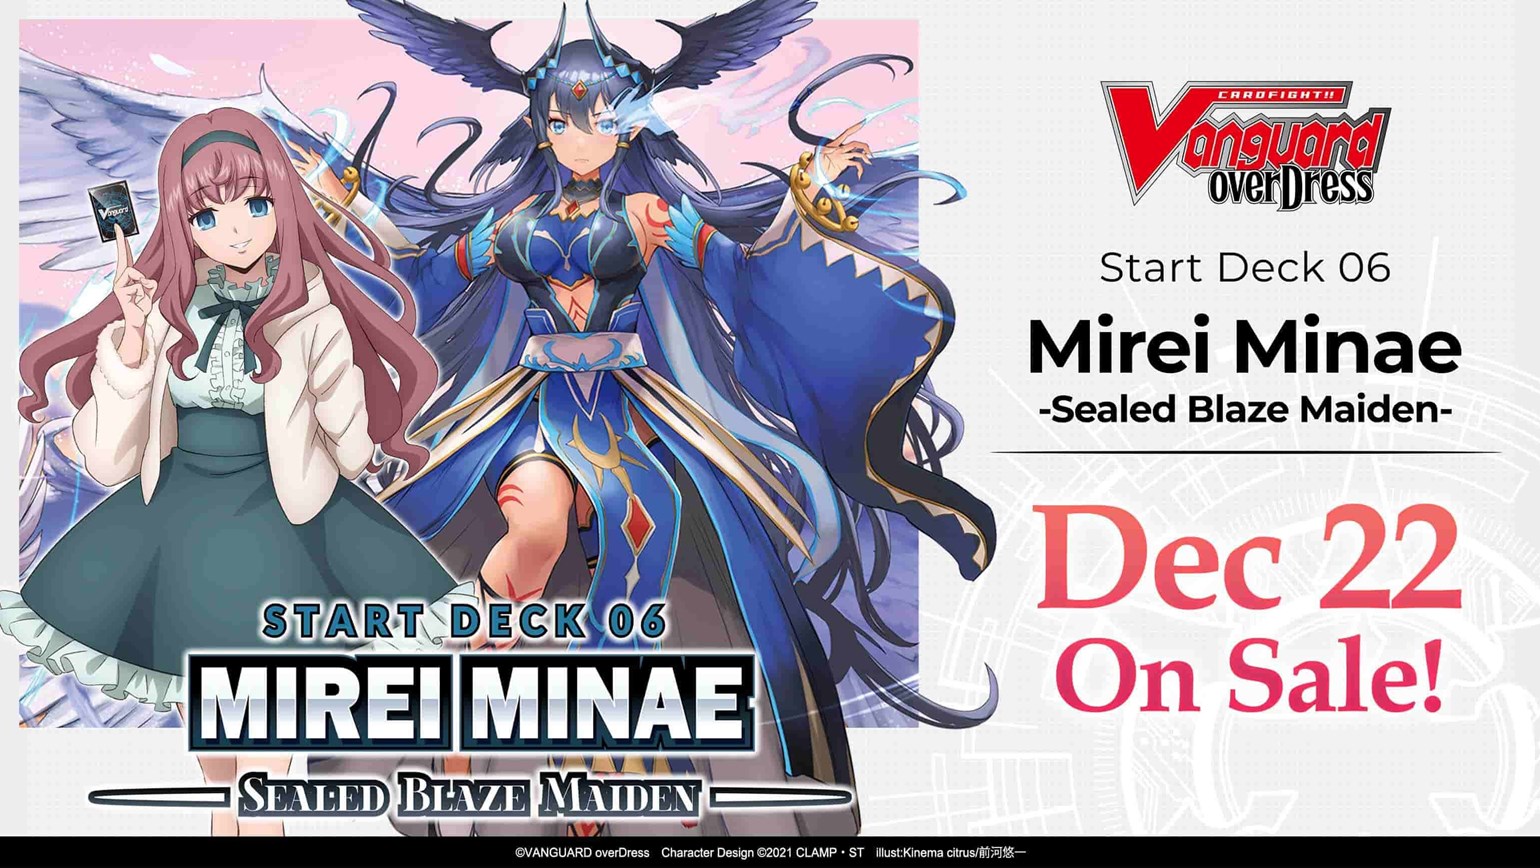 ​​New English Edition overDress overDress Start Deck 06: Mirei Minae -Sealed Blaze Maiden-, Coming to Stores on December 22nd!